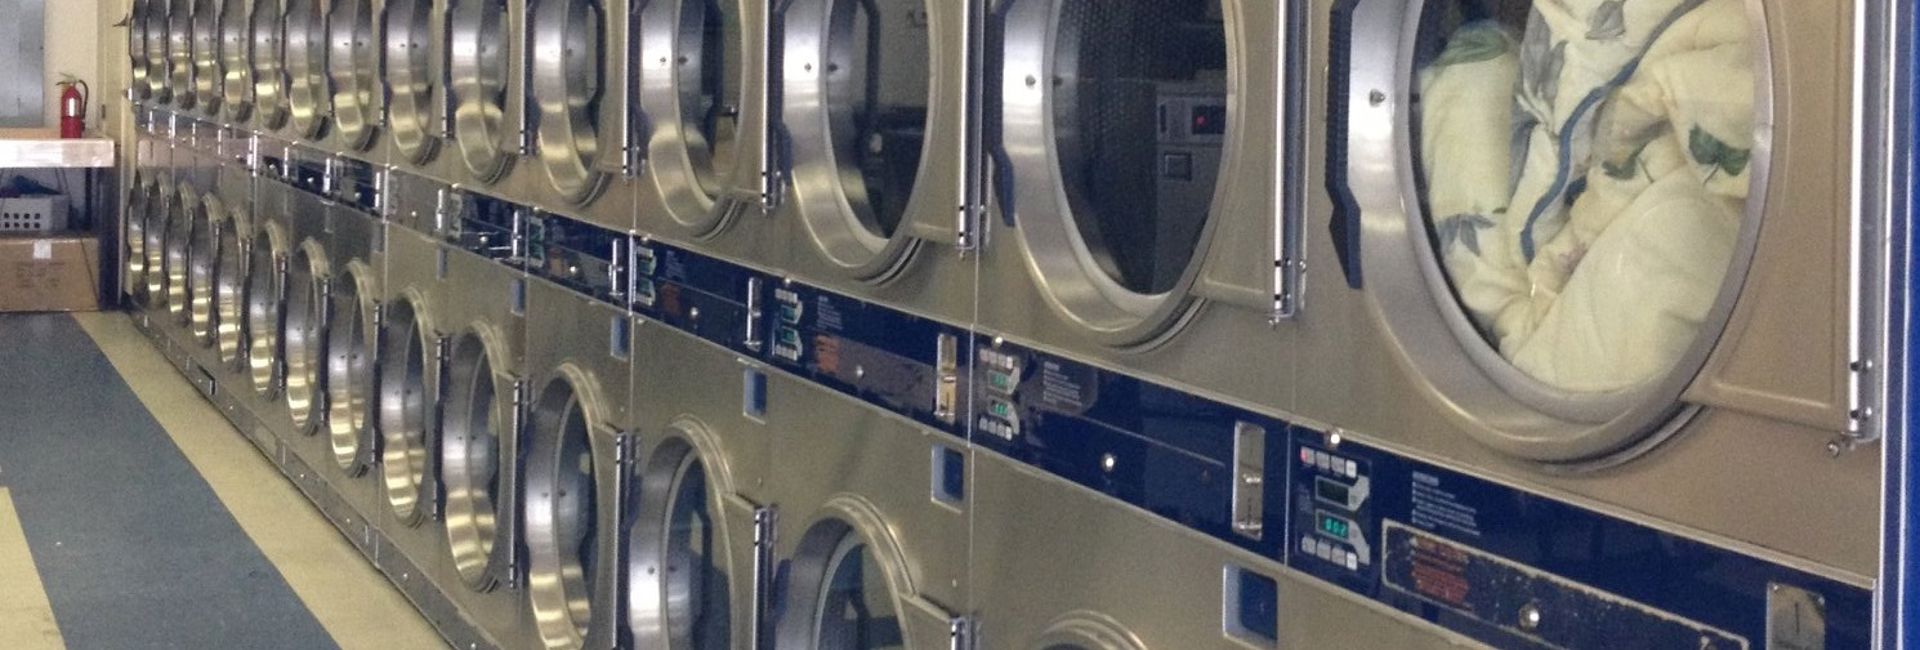 Laundry Pickup Service In Madeira Beach